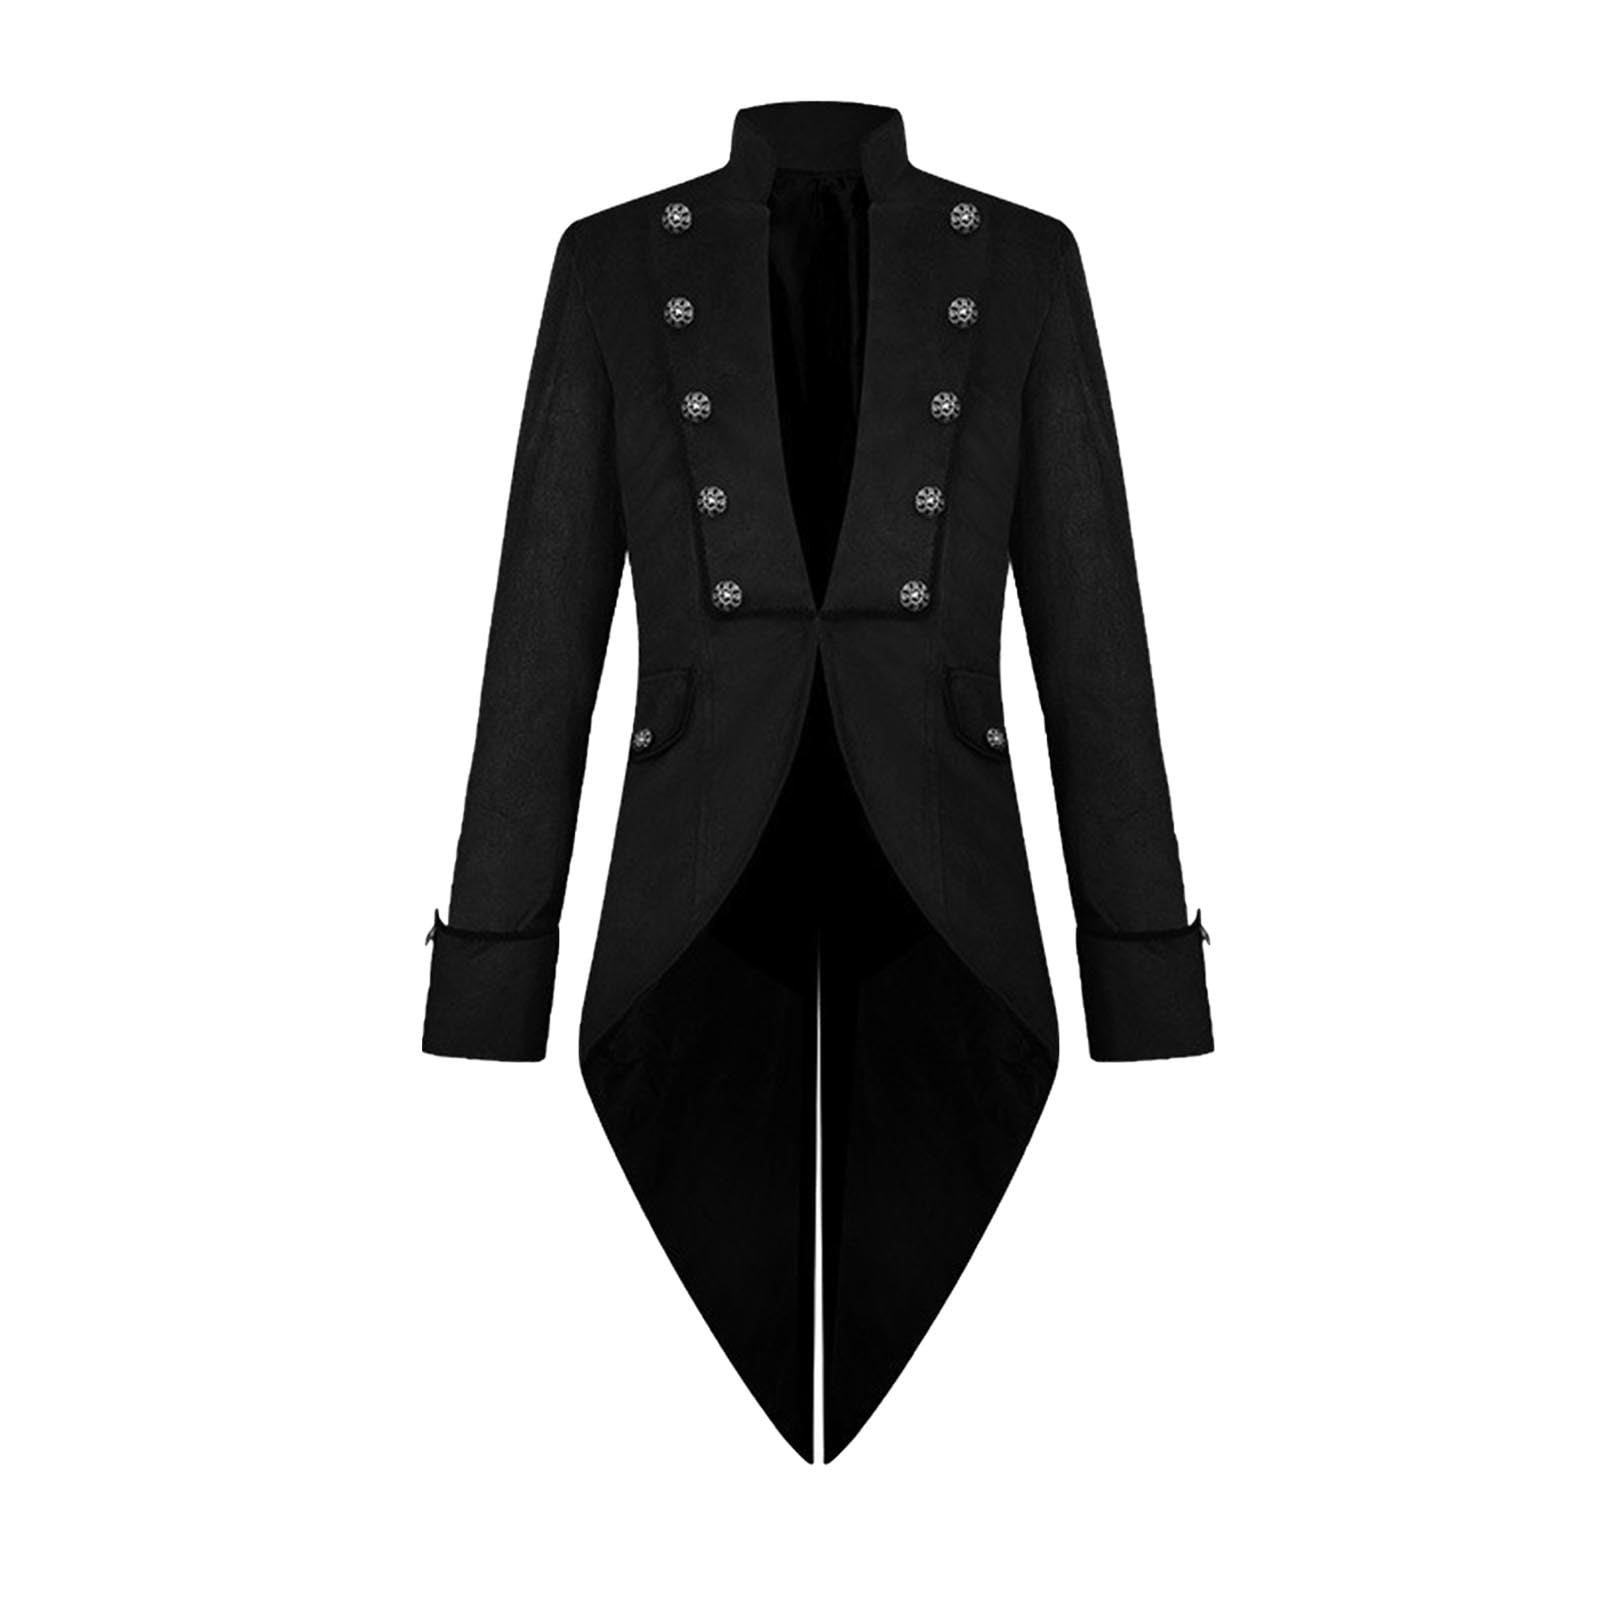 Mens Vintage Gothic Long Steampunk Formal Tailcoat Jacket Gothic Victorian Tuxedo Frock Coat Costume for Halloween 